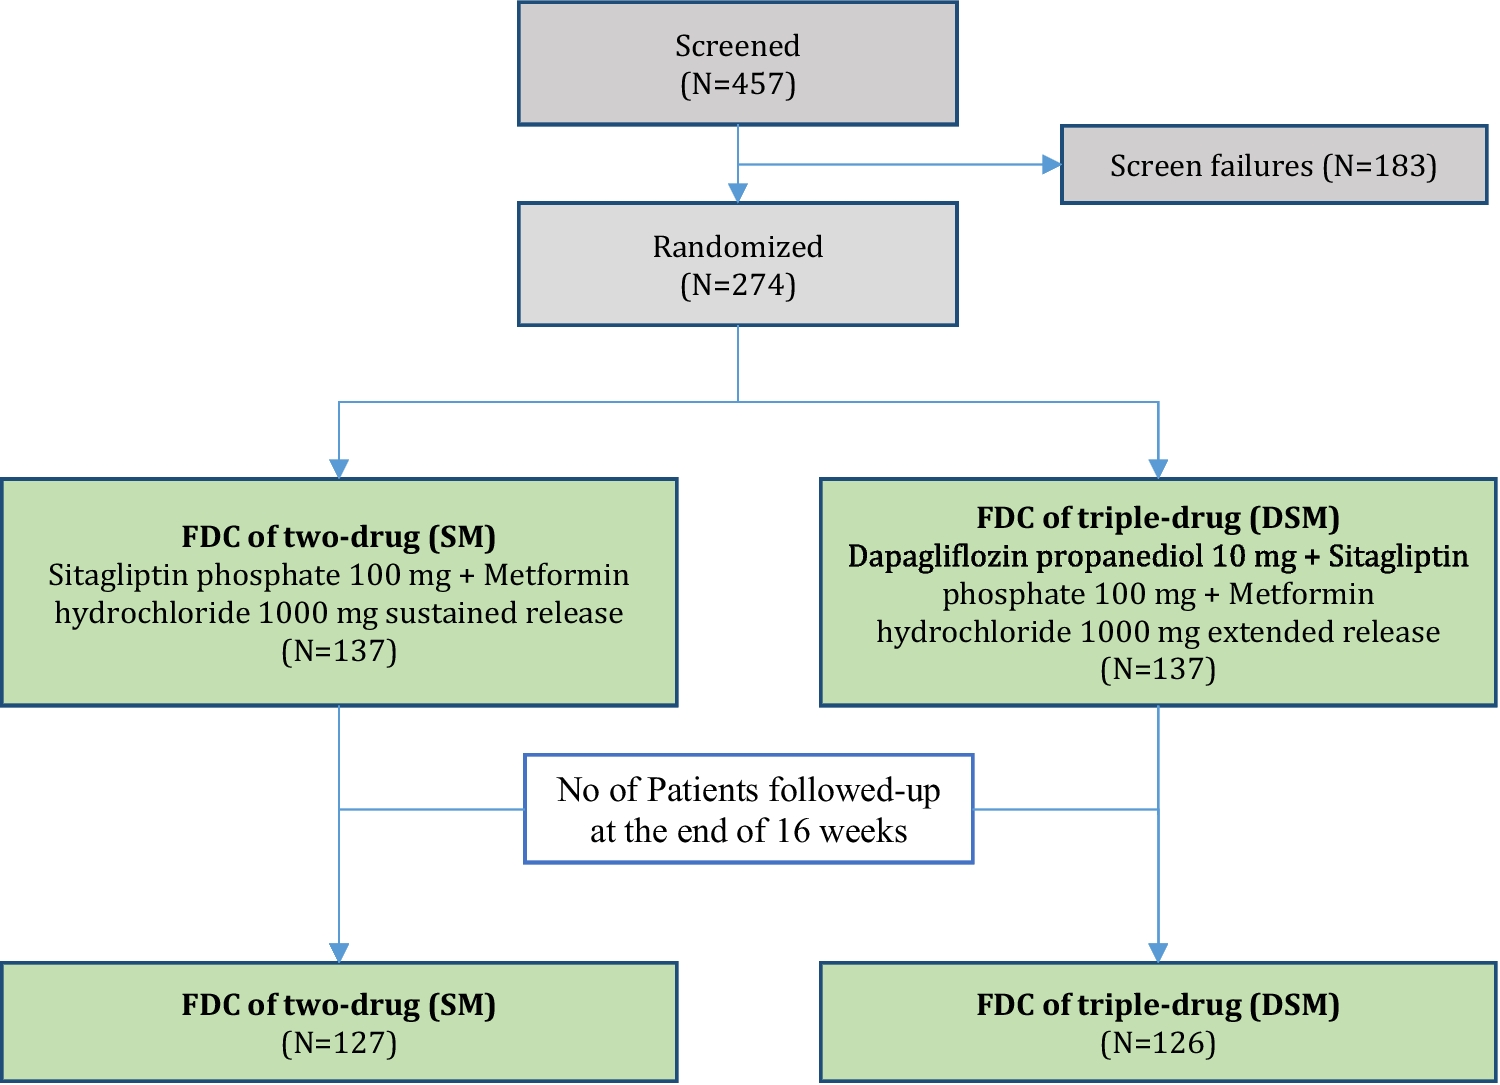 A randomized, double-blind, active-controlled trial assessing the efficacy and safety of a fixed-dose combination (FDC) of MEtformin hydrochloride 1000 mg ER, SItagliptin phosphate 100 mg, and DApagliflozin propanediol 10 mg in Indian adults with type 2 diabetes: The MESIDA trial